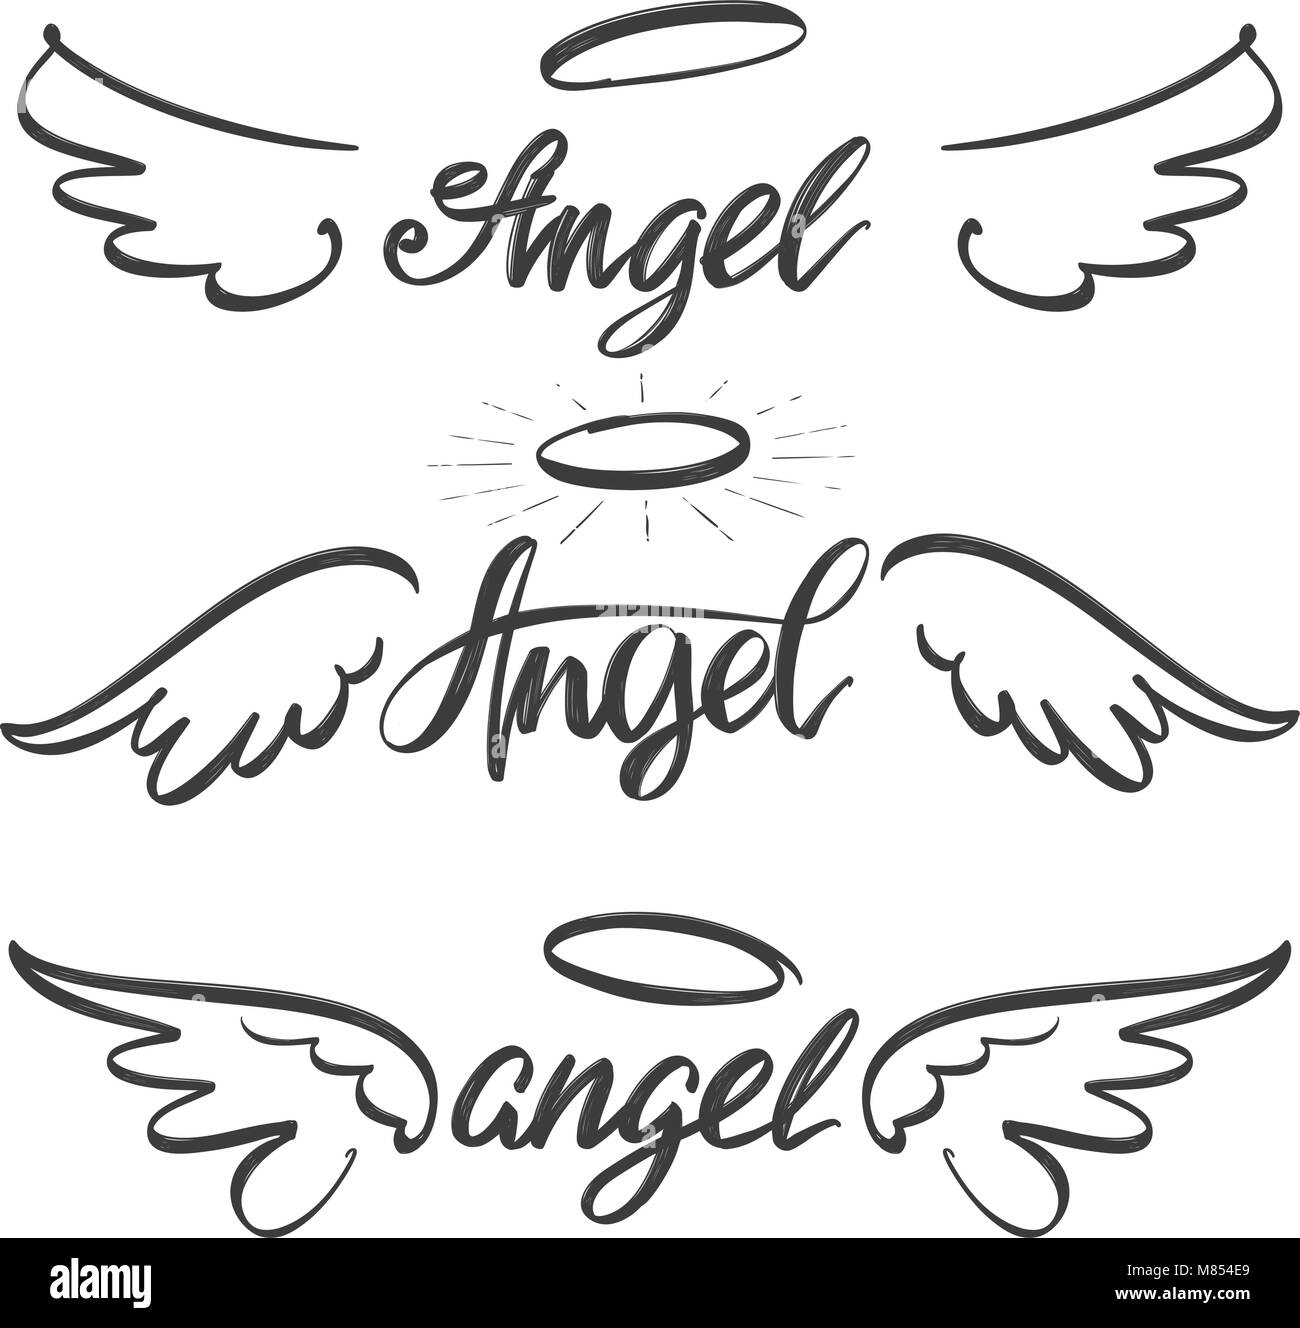 Angel wings icon sketch collection, religious calligraphic text symbol of Christianity hand drawn vector illustration sketch Stock Vector